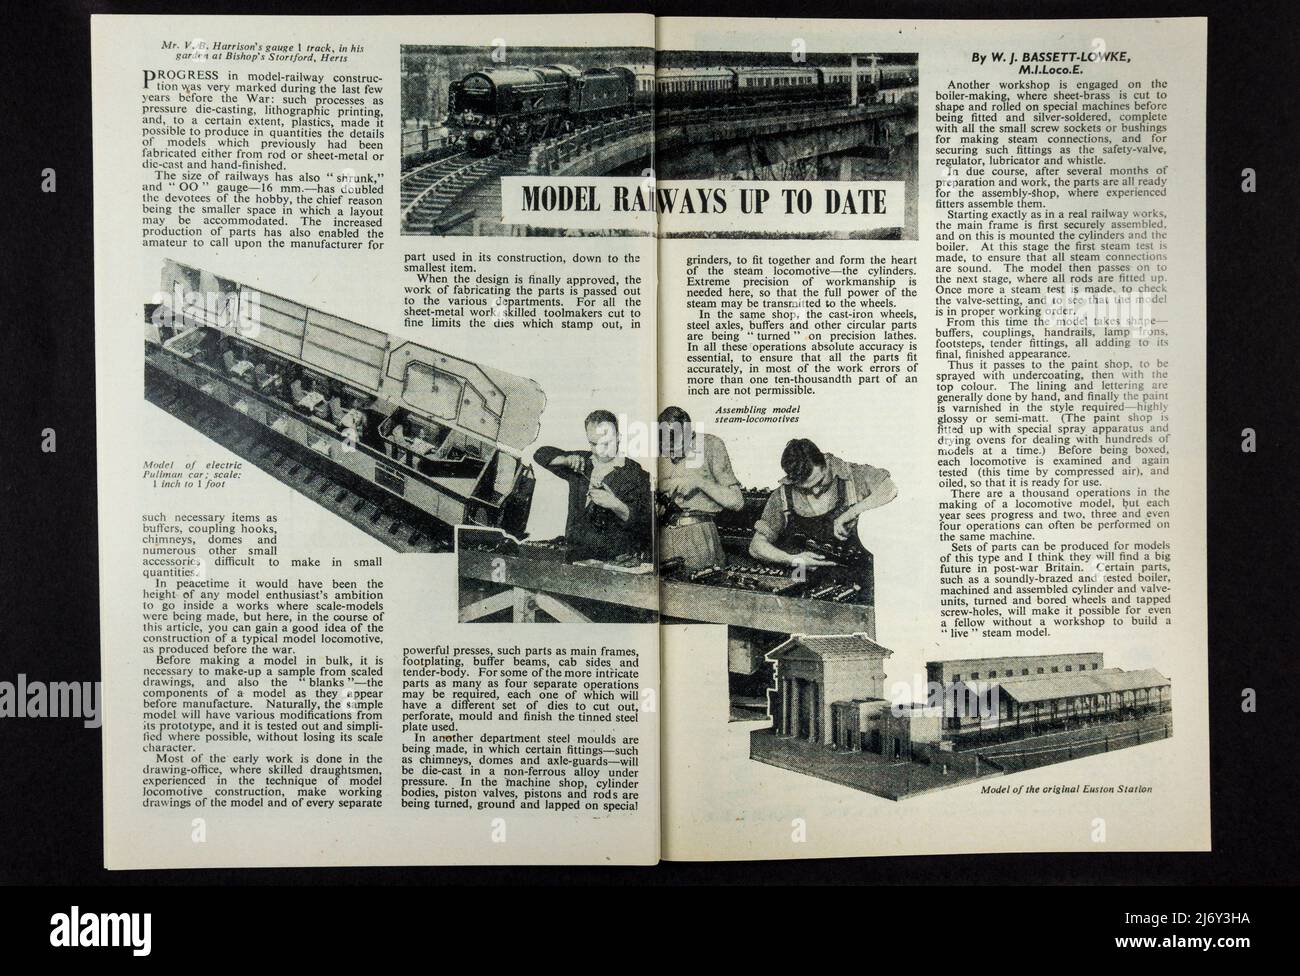 'Model Railways Up To Date' article on model railways in the December 1944 Boys Own magazine (replica), memorabilia relating to children during WWII. Stock Photo